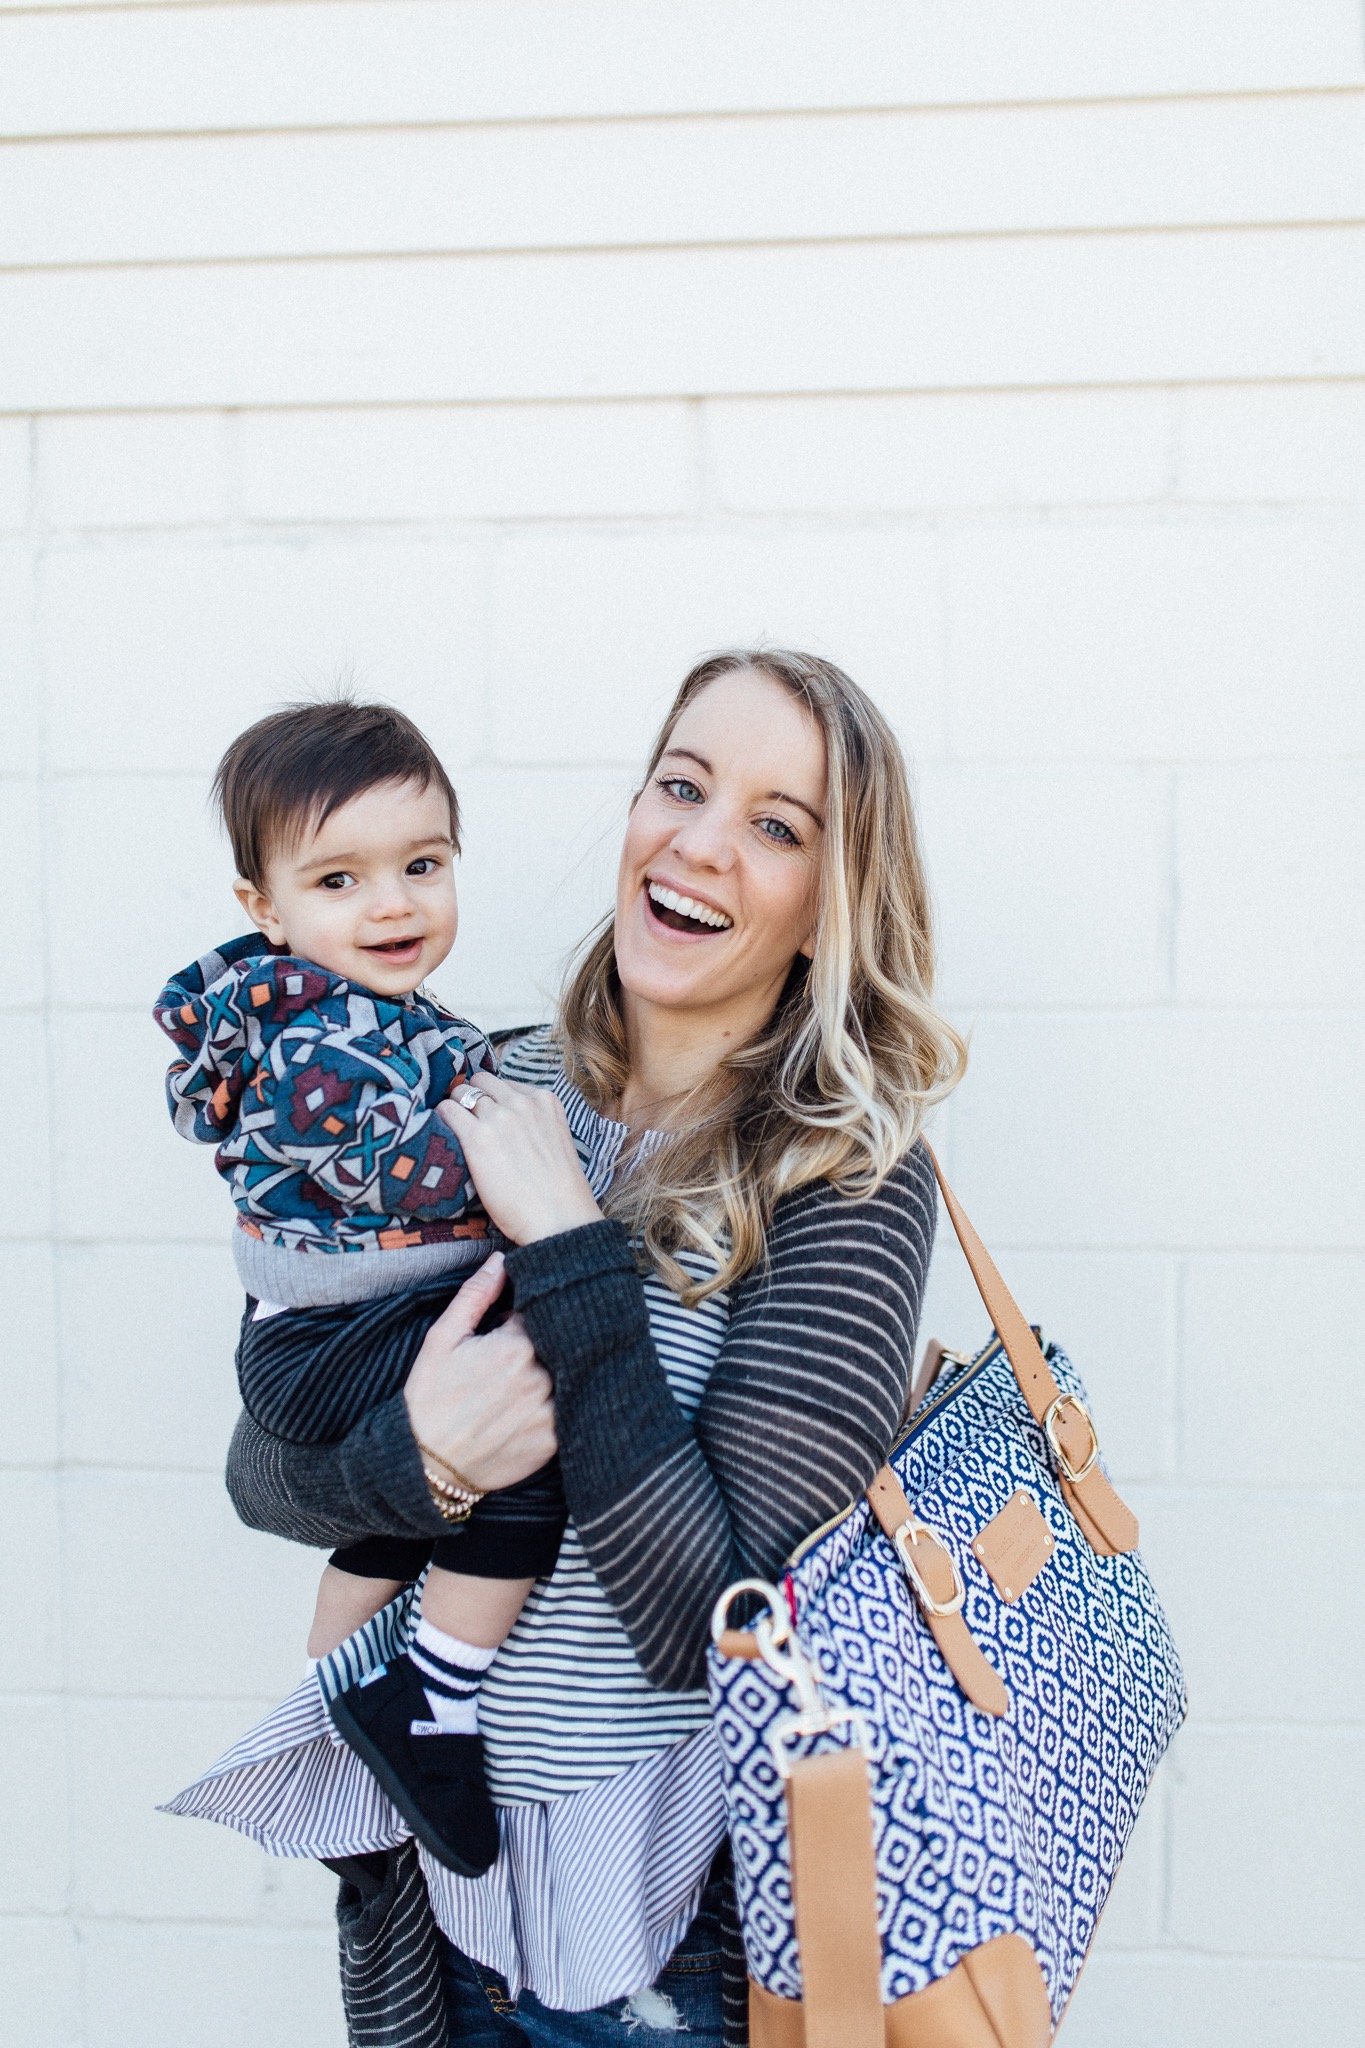 Enjoying my toddler with a classy organized diaper bag by minneapolis brand austin fowler